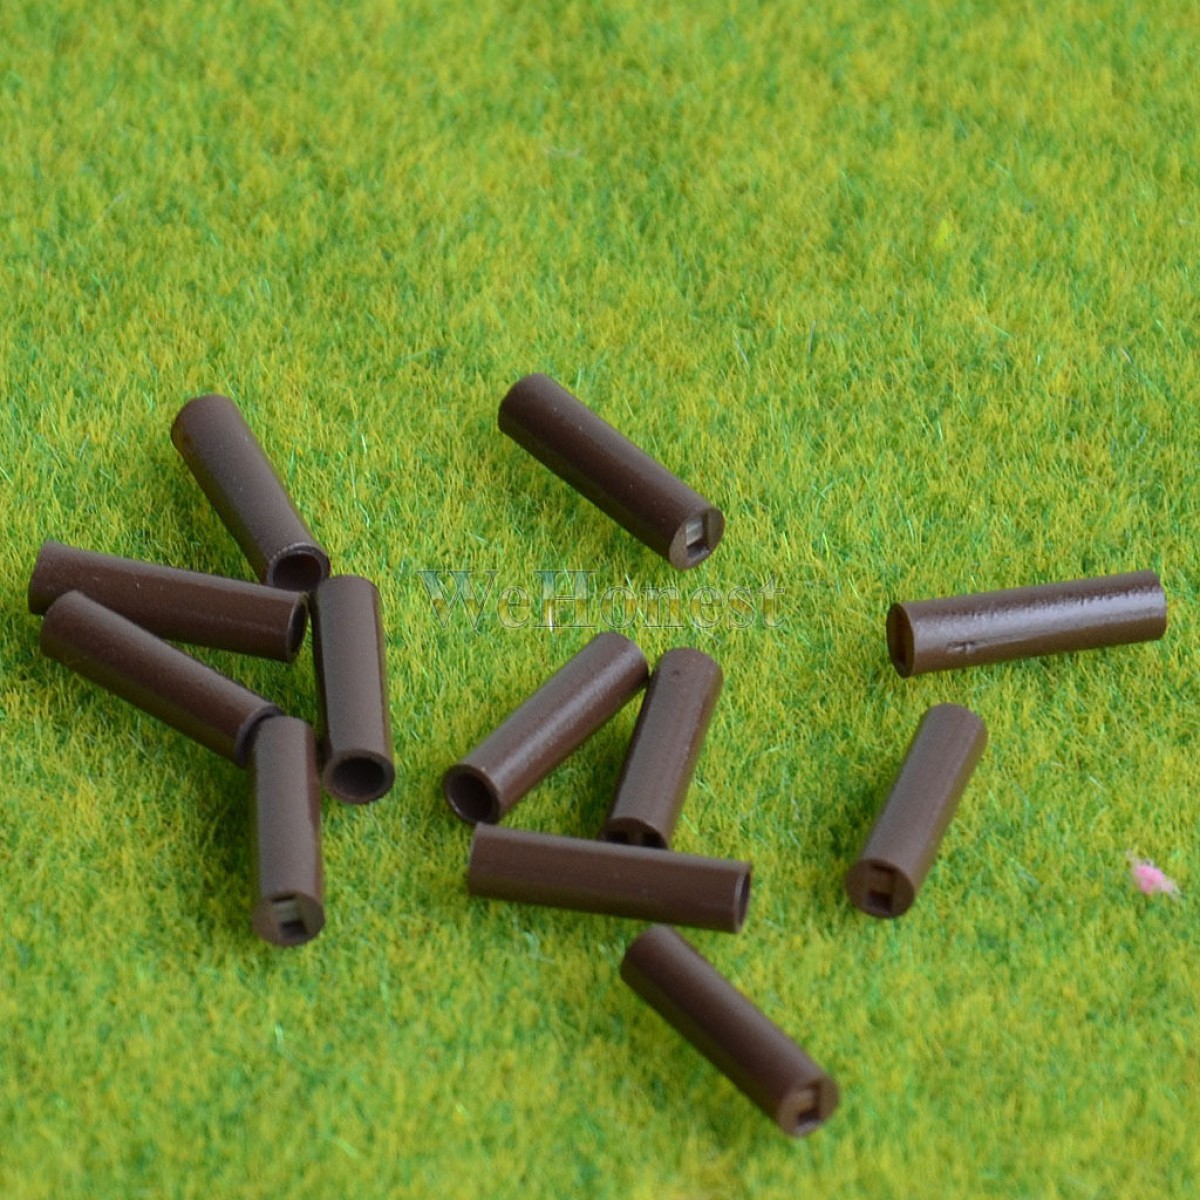 20 pcs brown Trees' Stands for #7828, 8030, 7027, 7035, 6030 trees Glue Style #S